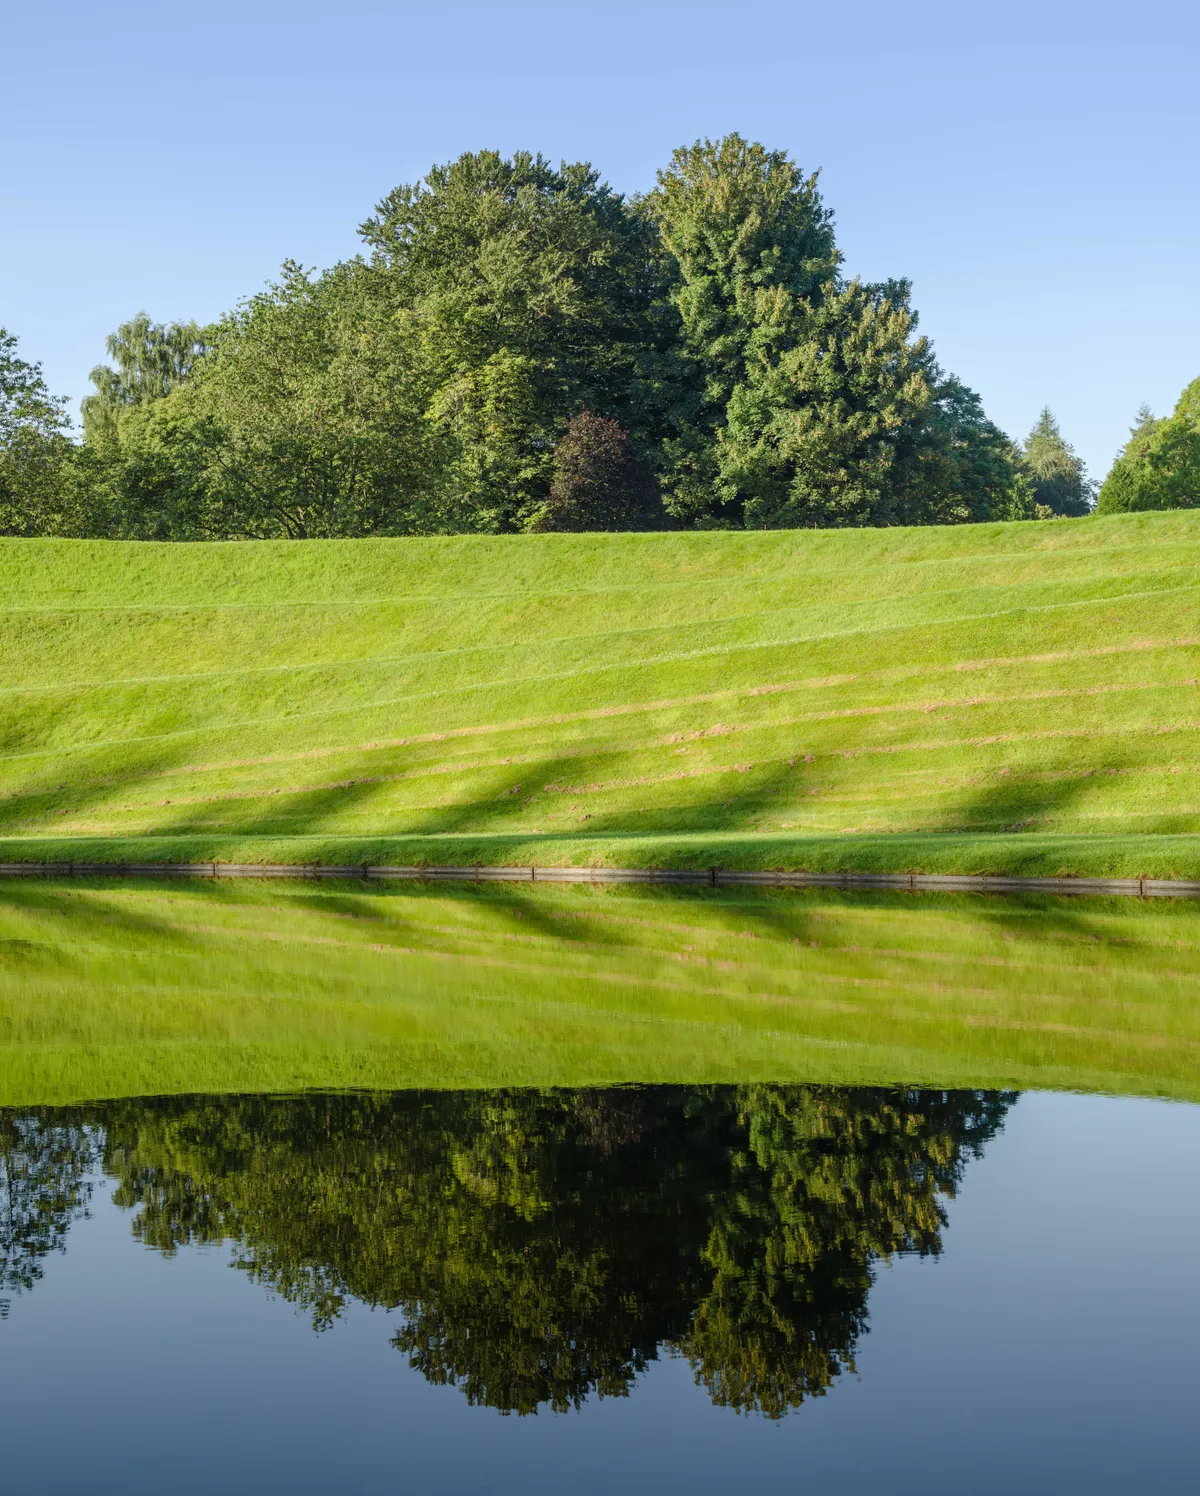 The Garden of Cosmic Speculation